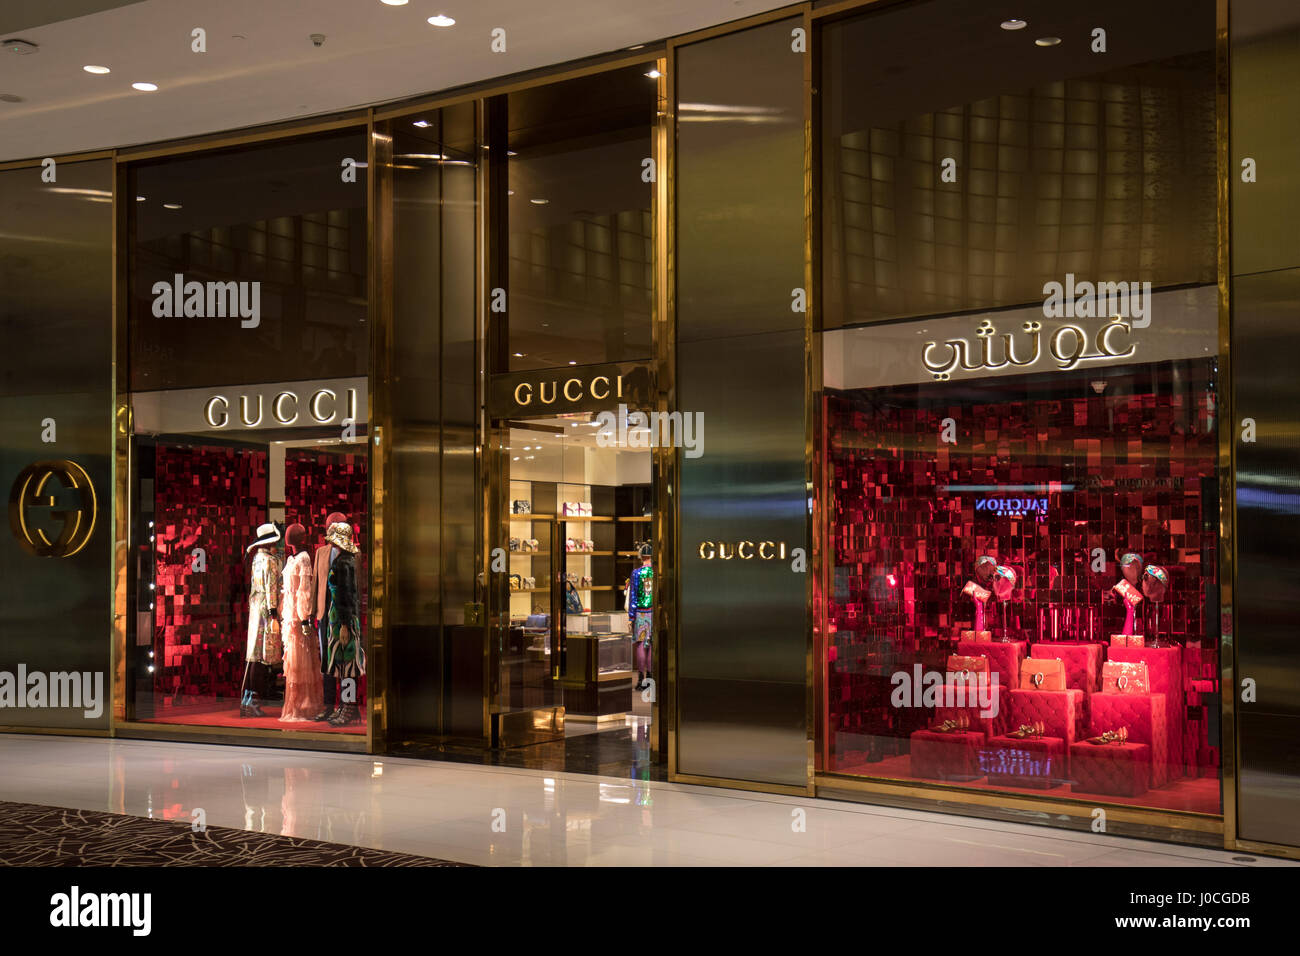 Gucci Mall High Resolution Stock Photography and Images - Alamy